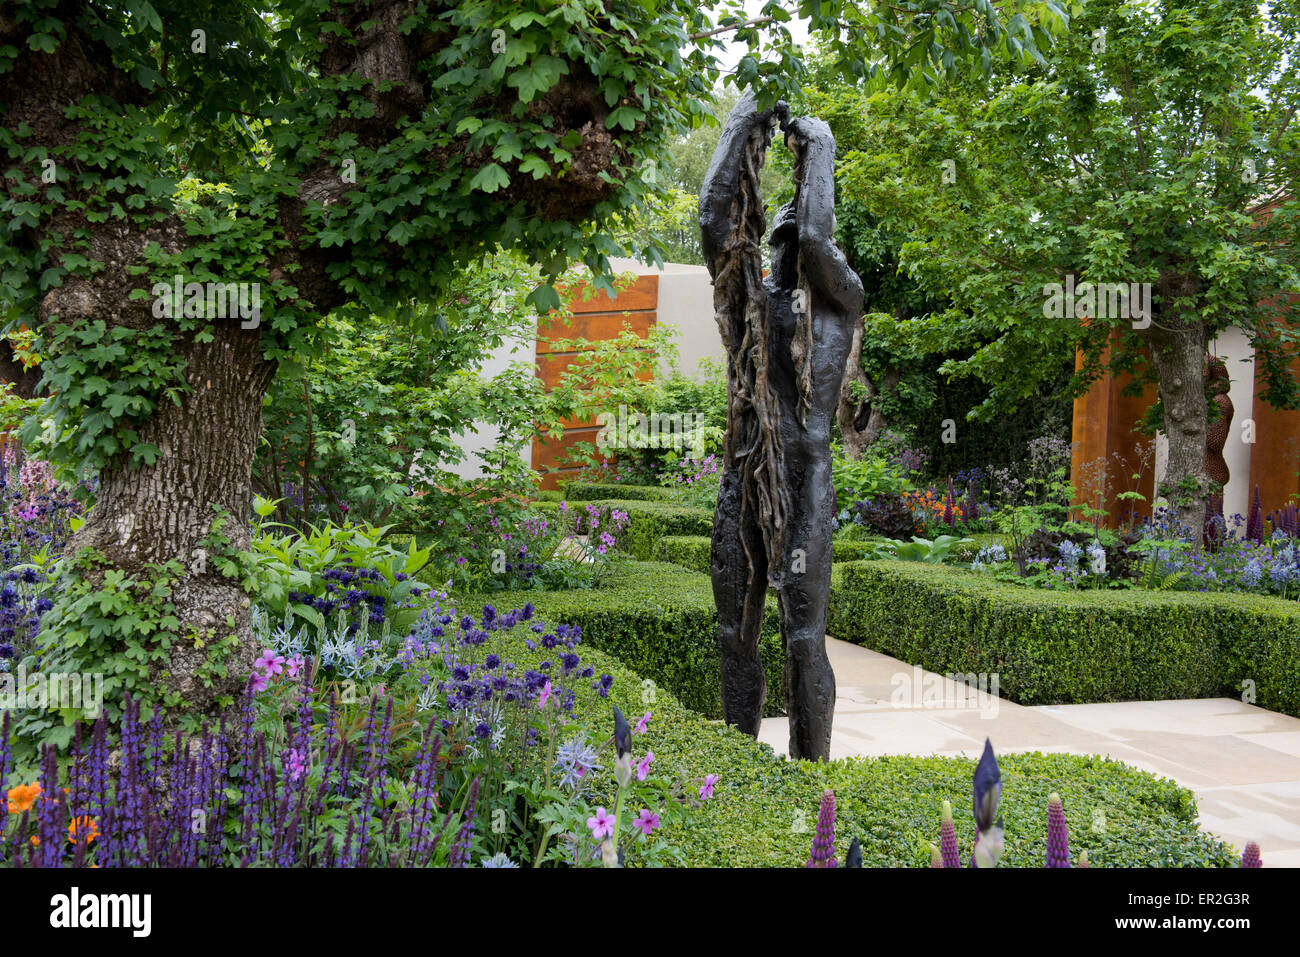 A bronze statue by Anna Gillespie in The Morgan Stanley Healthy Cities Garden at the Chelsea Flower Show Stock Photo